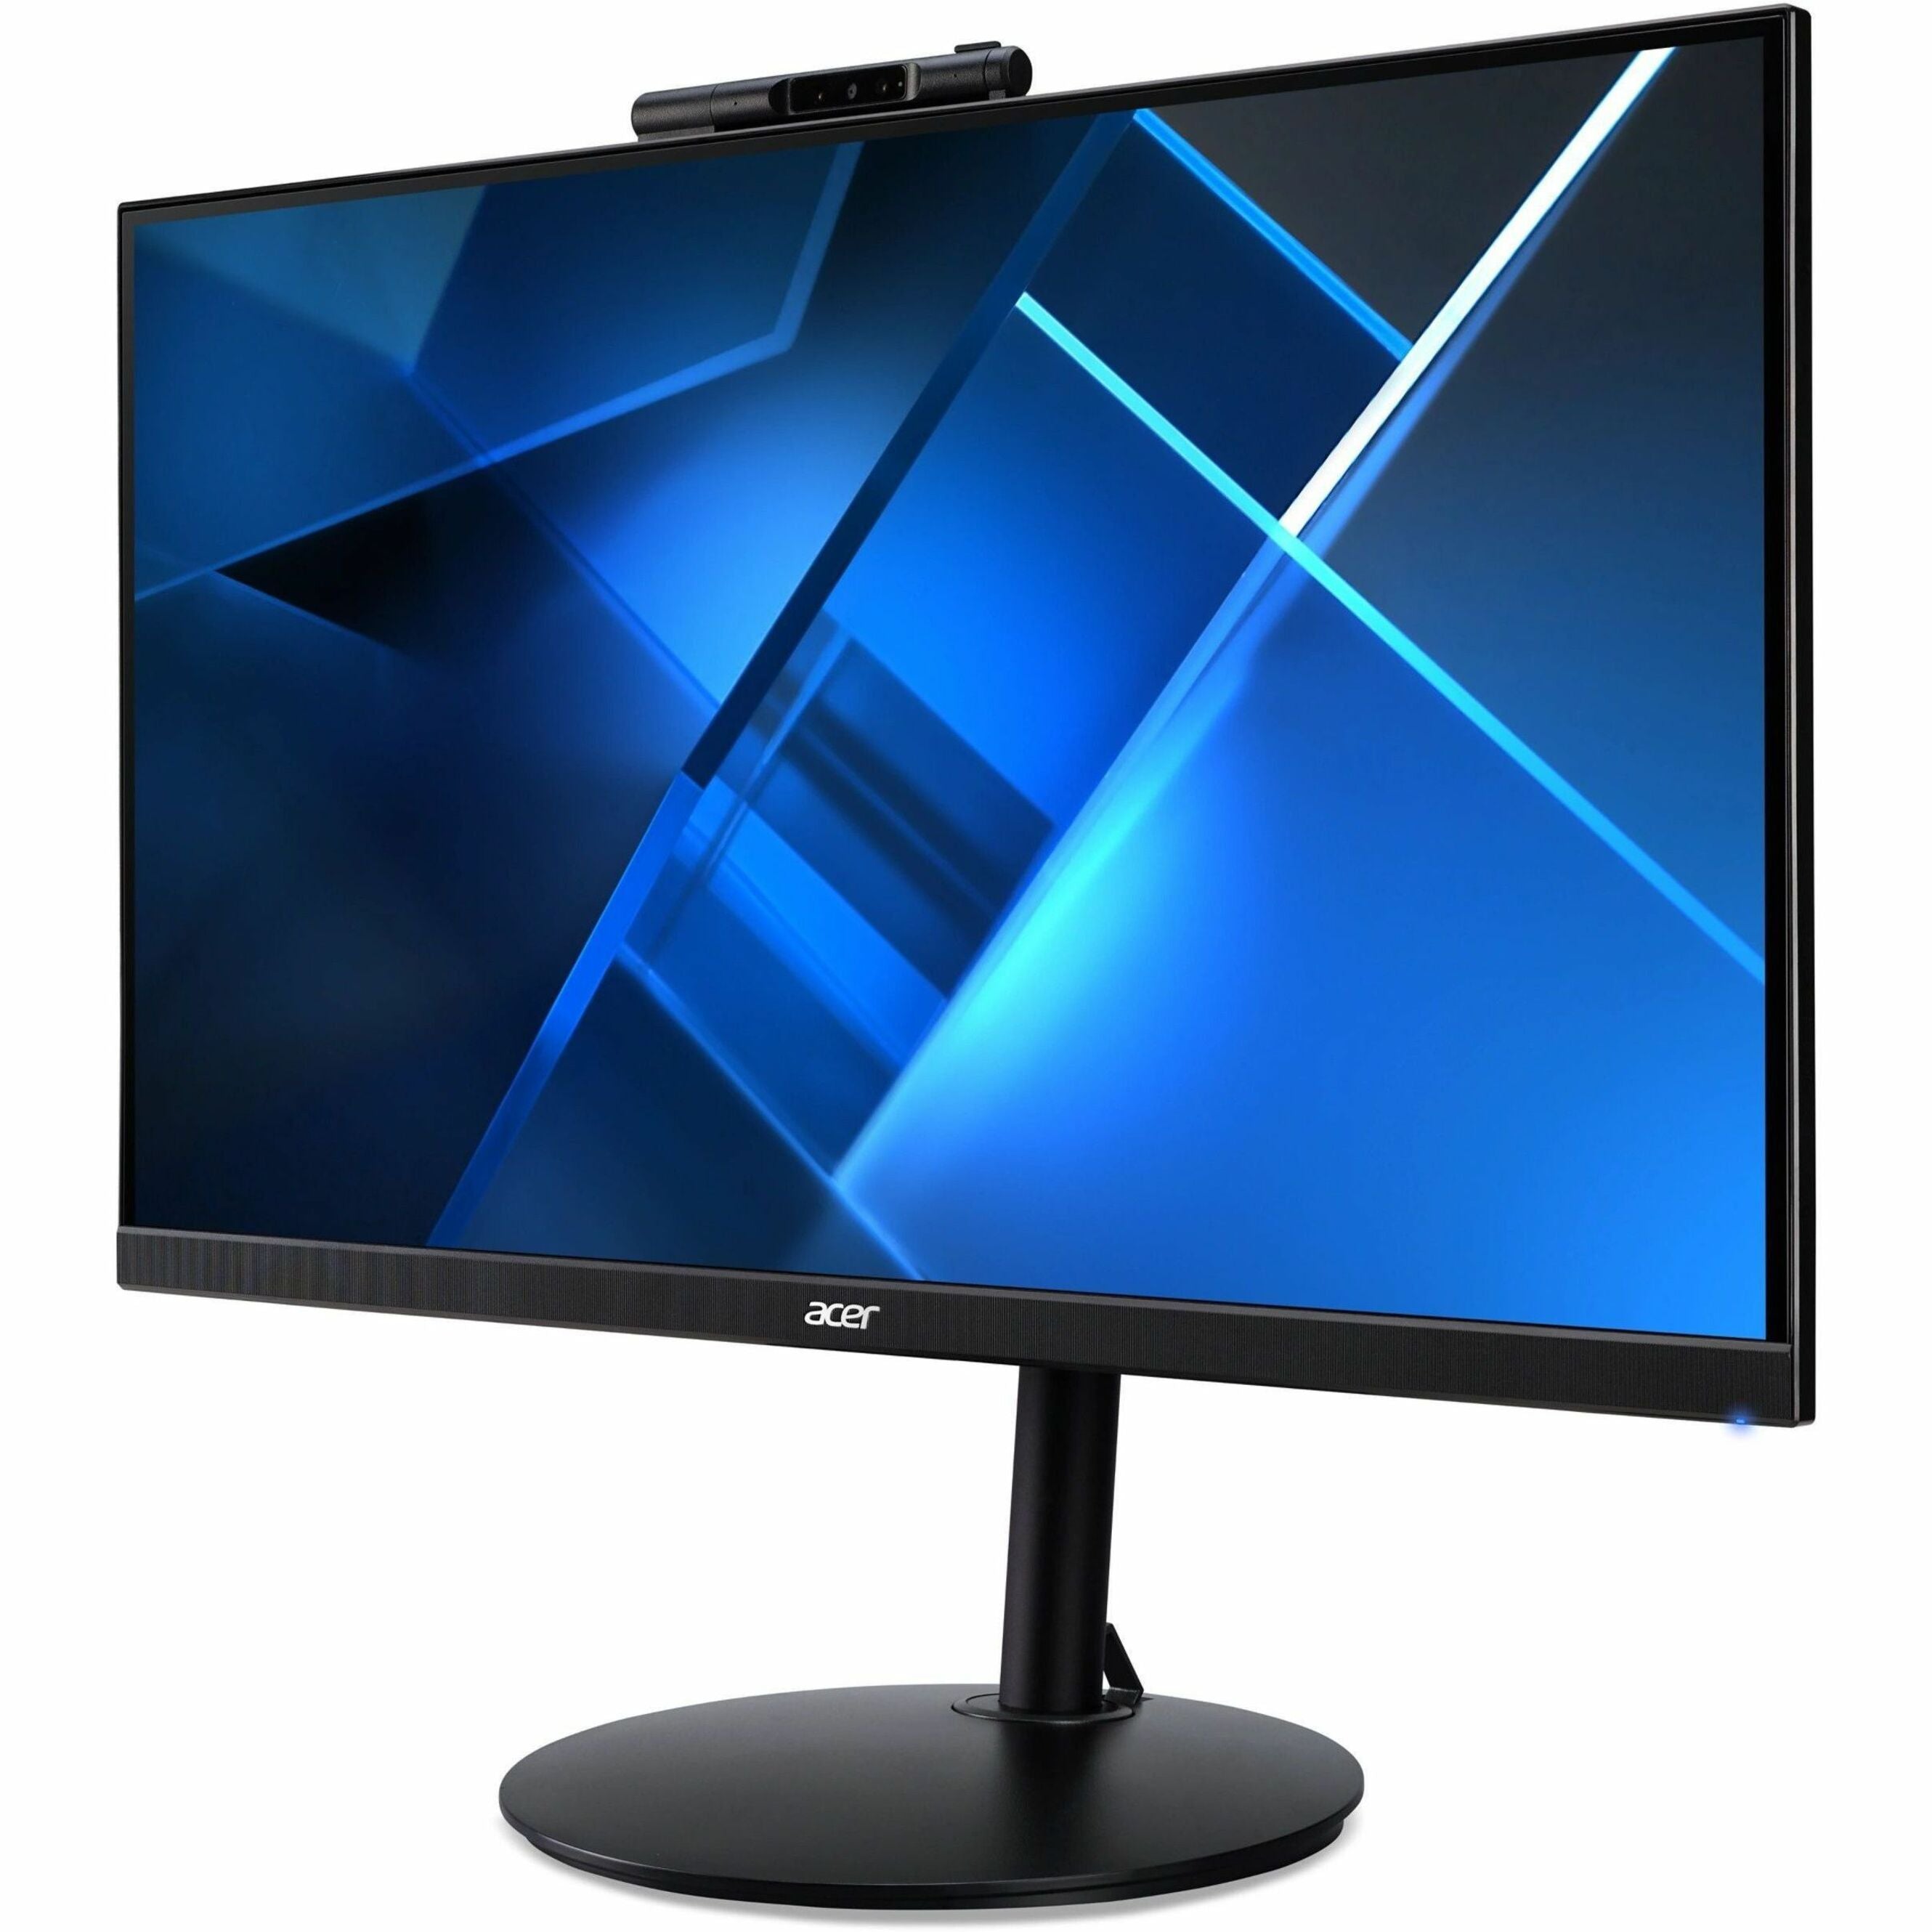 Acer UM.HB2AA.D01 CB272 D Widescreen LCD Monitor, 27 Full HD, 1ms Response Time, FreeSync, Built-in Speakers